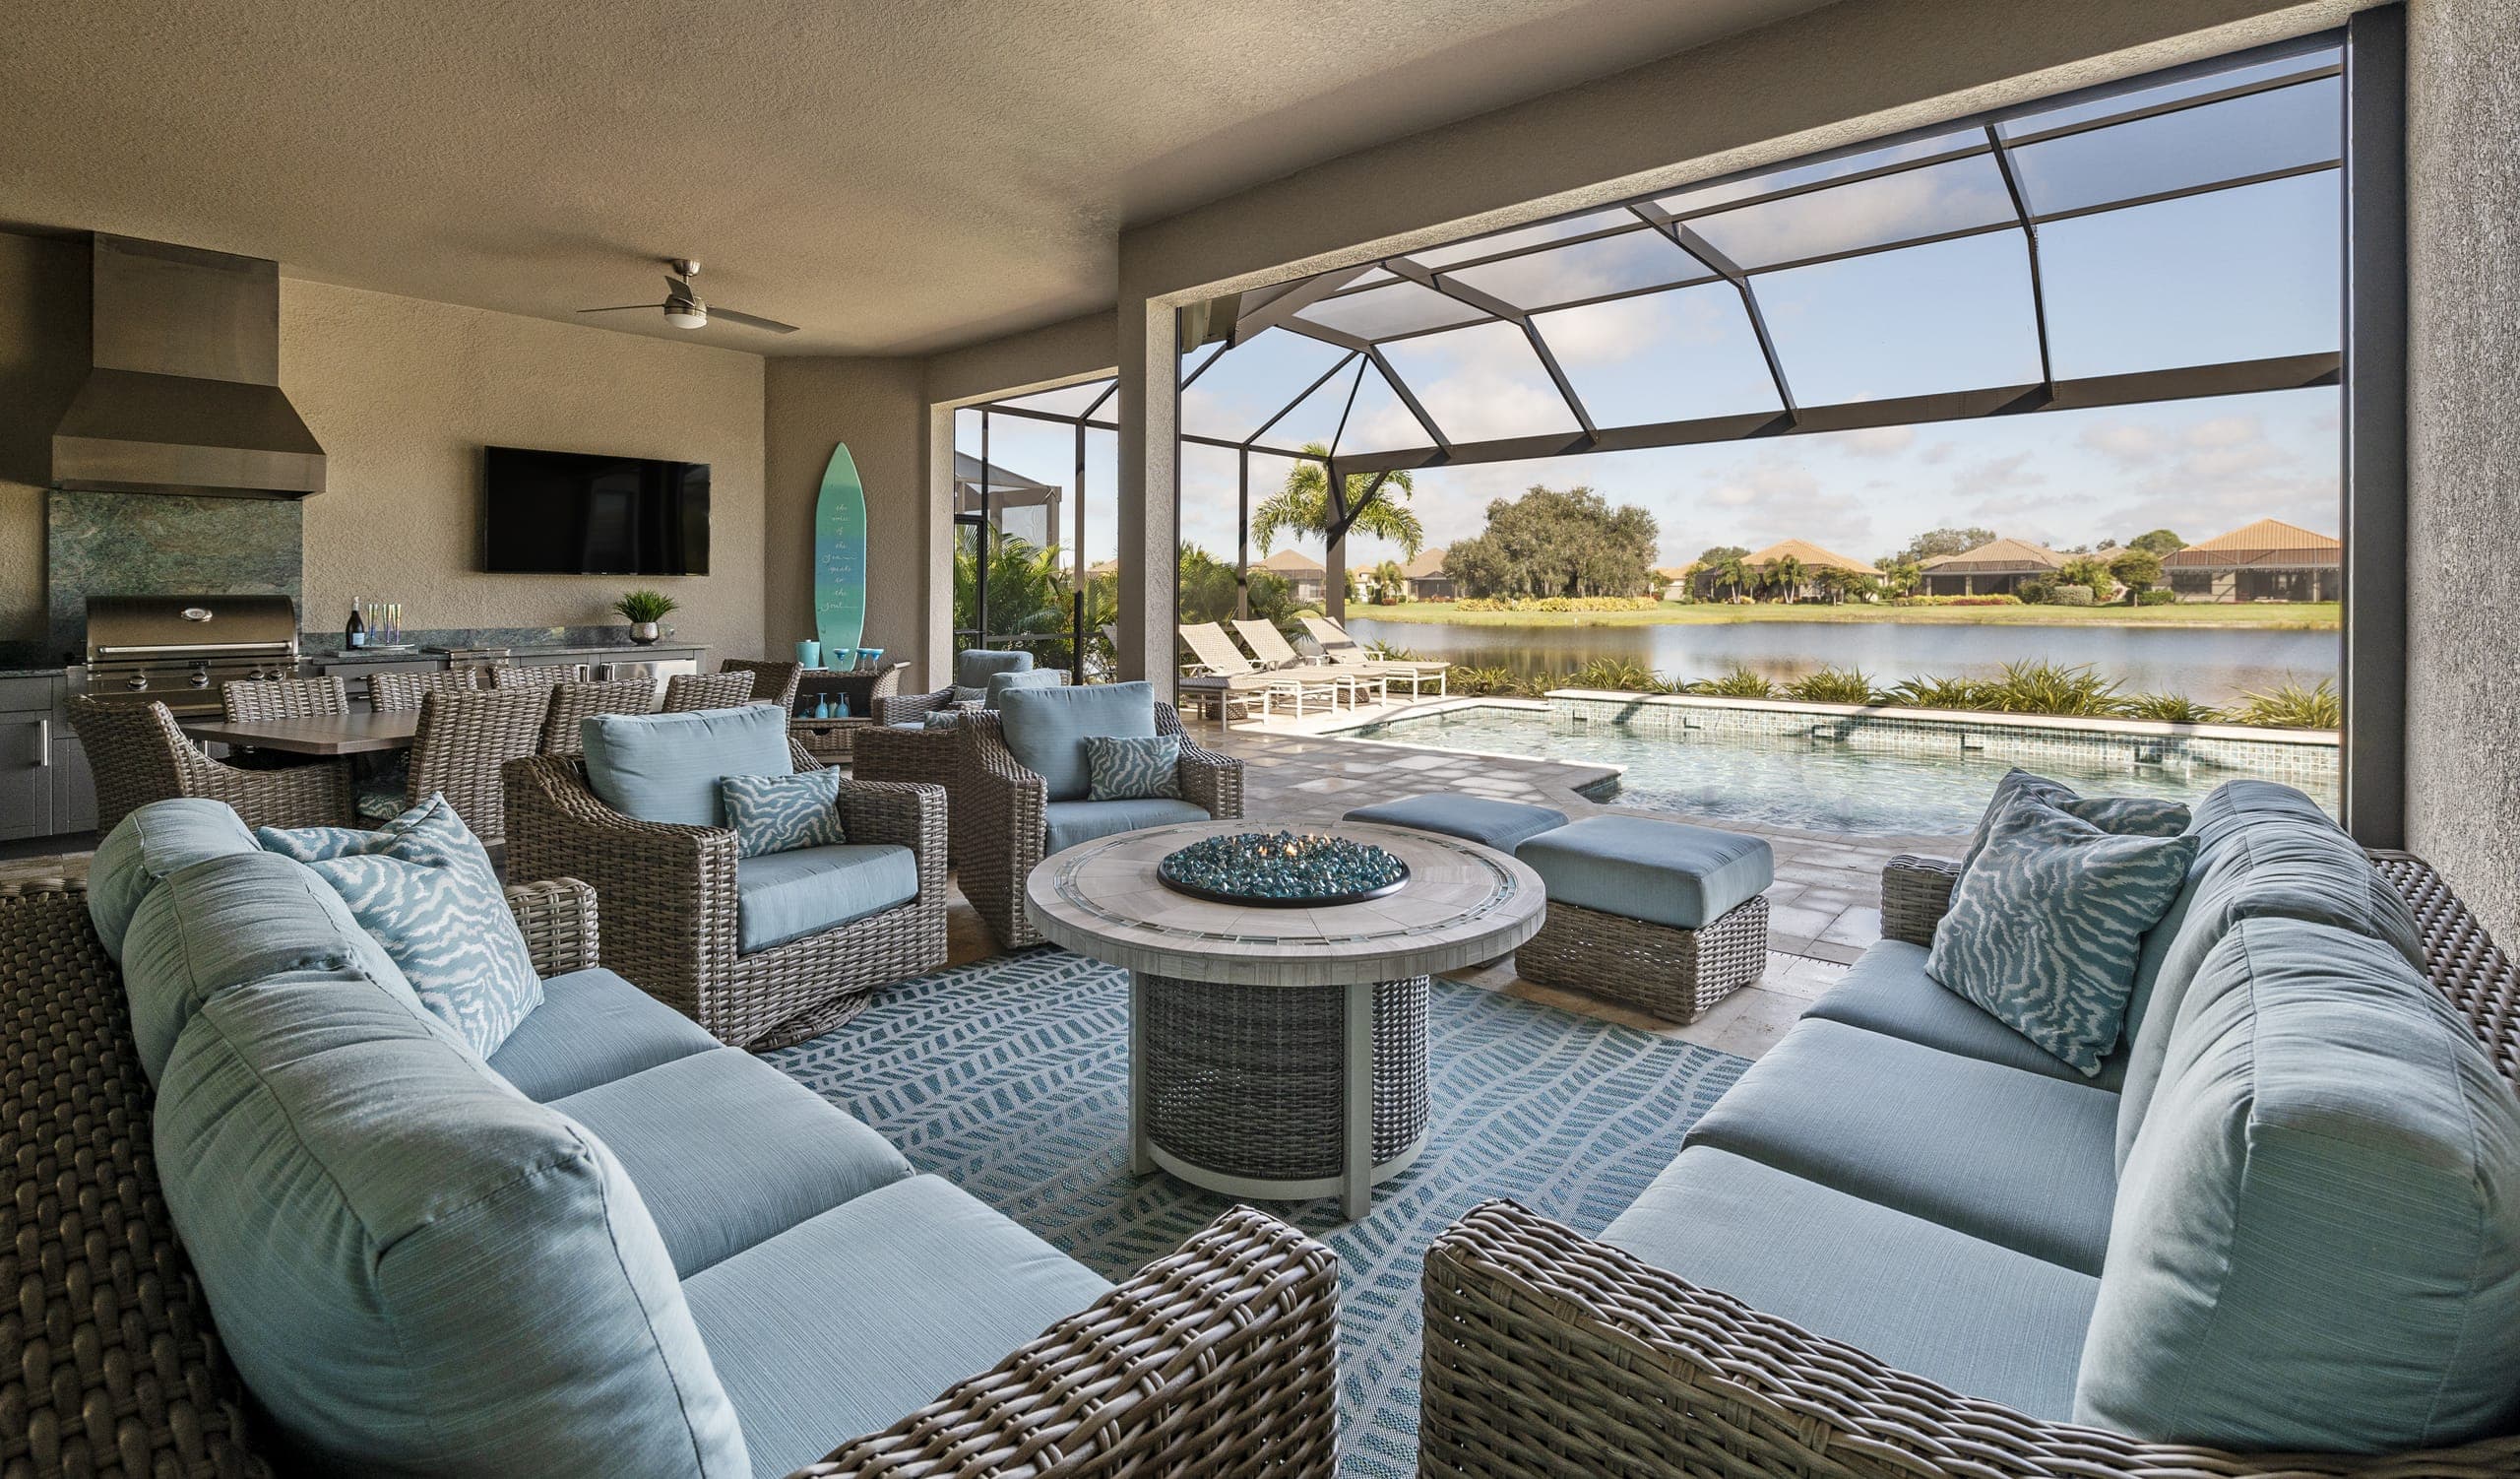 Teal Wicker Outdoor Funiture Fire Table Pool View